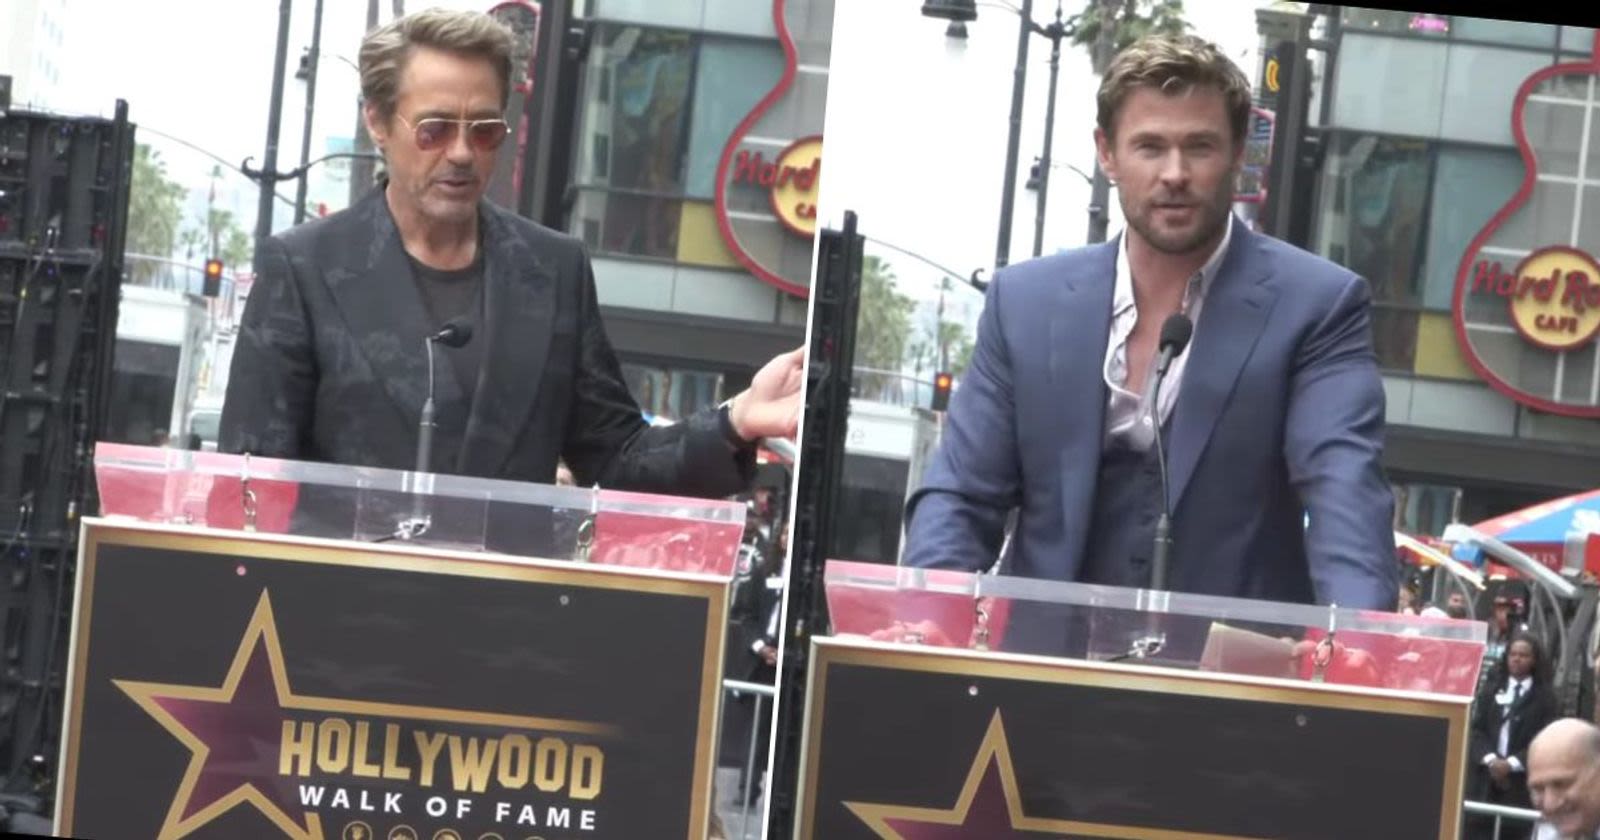 Chris Hemsworth's Hollywood Walk of Fame Ceremony Turns Into a Marvelous Roast